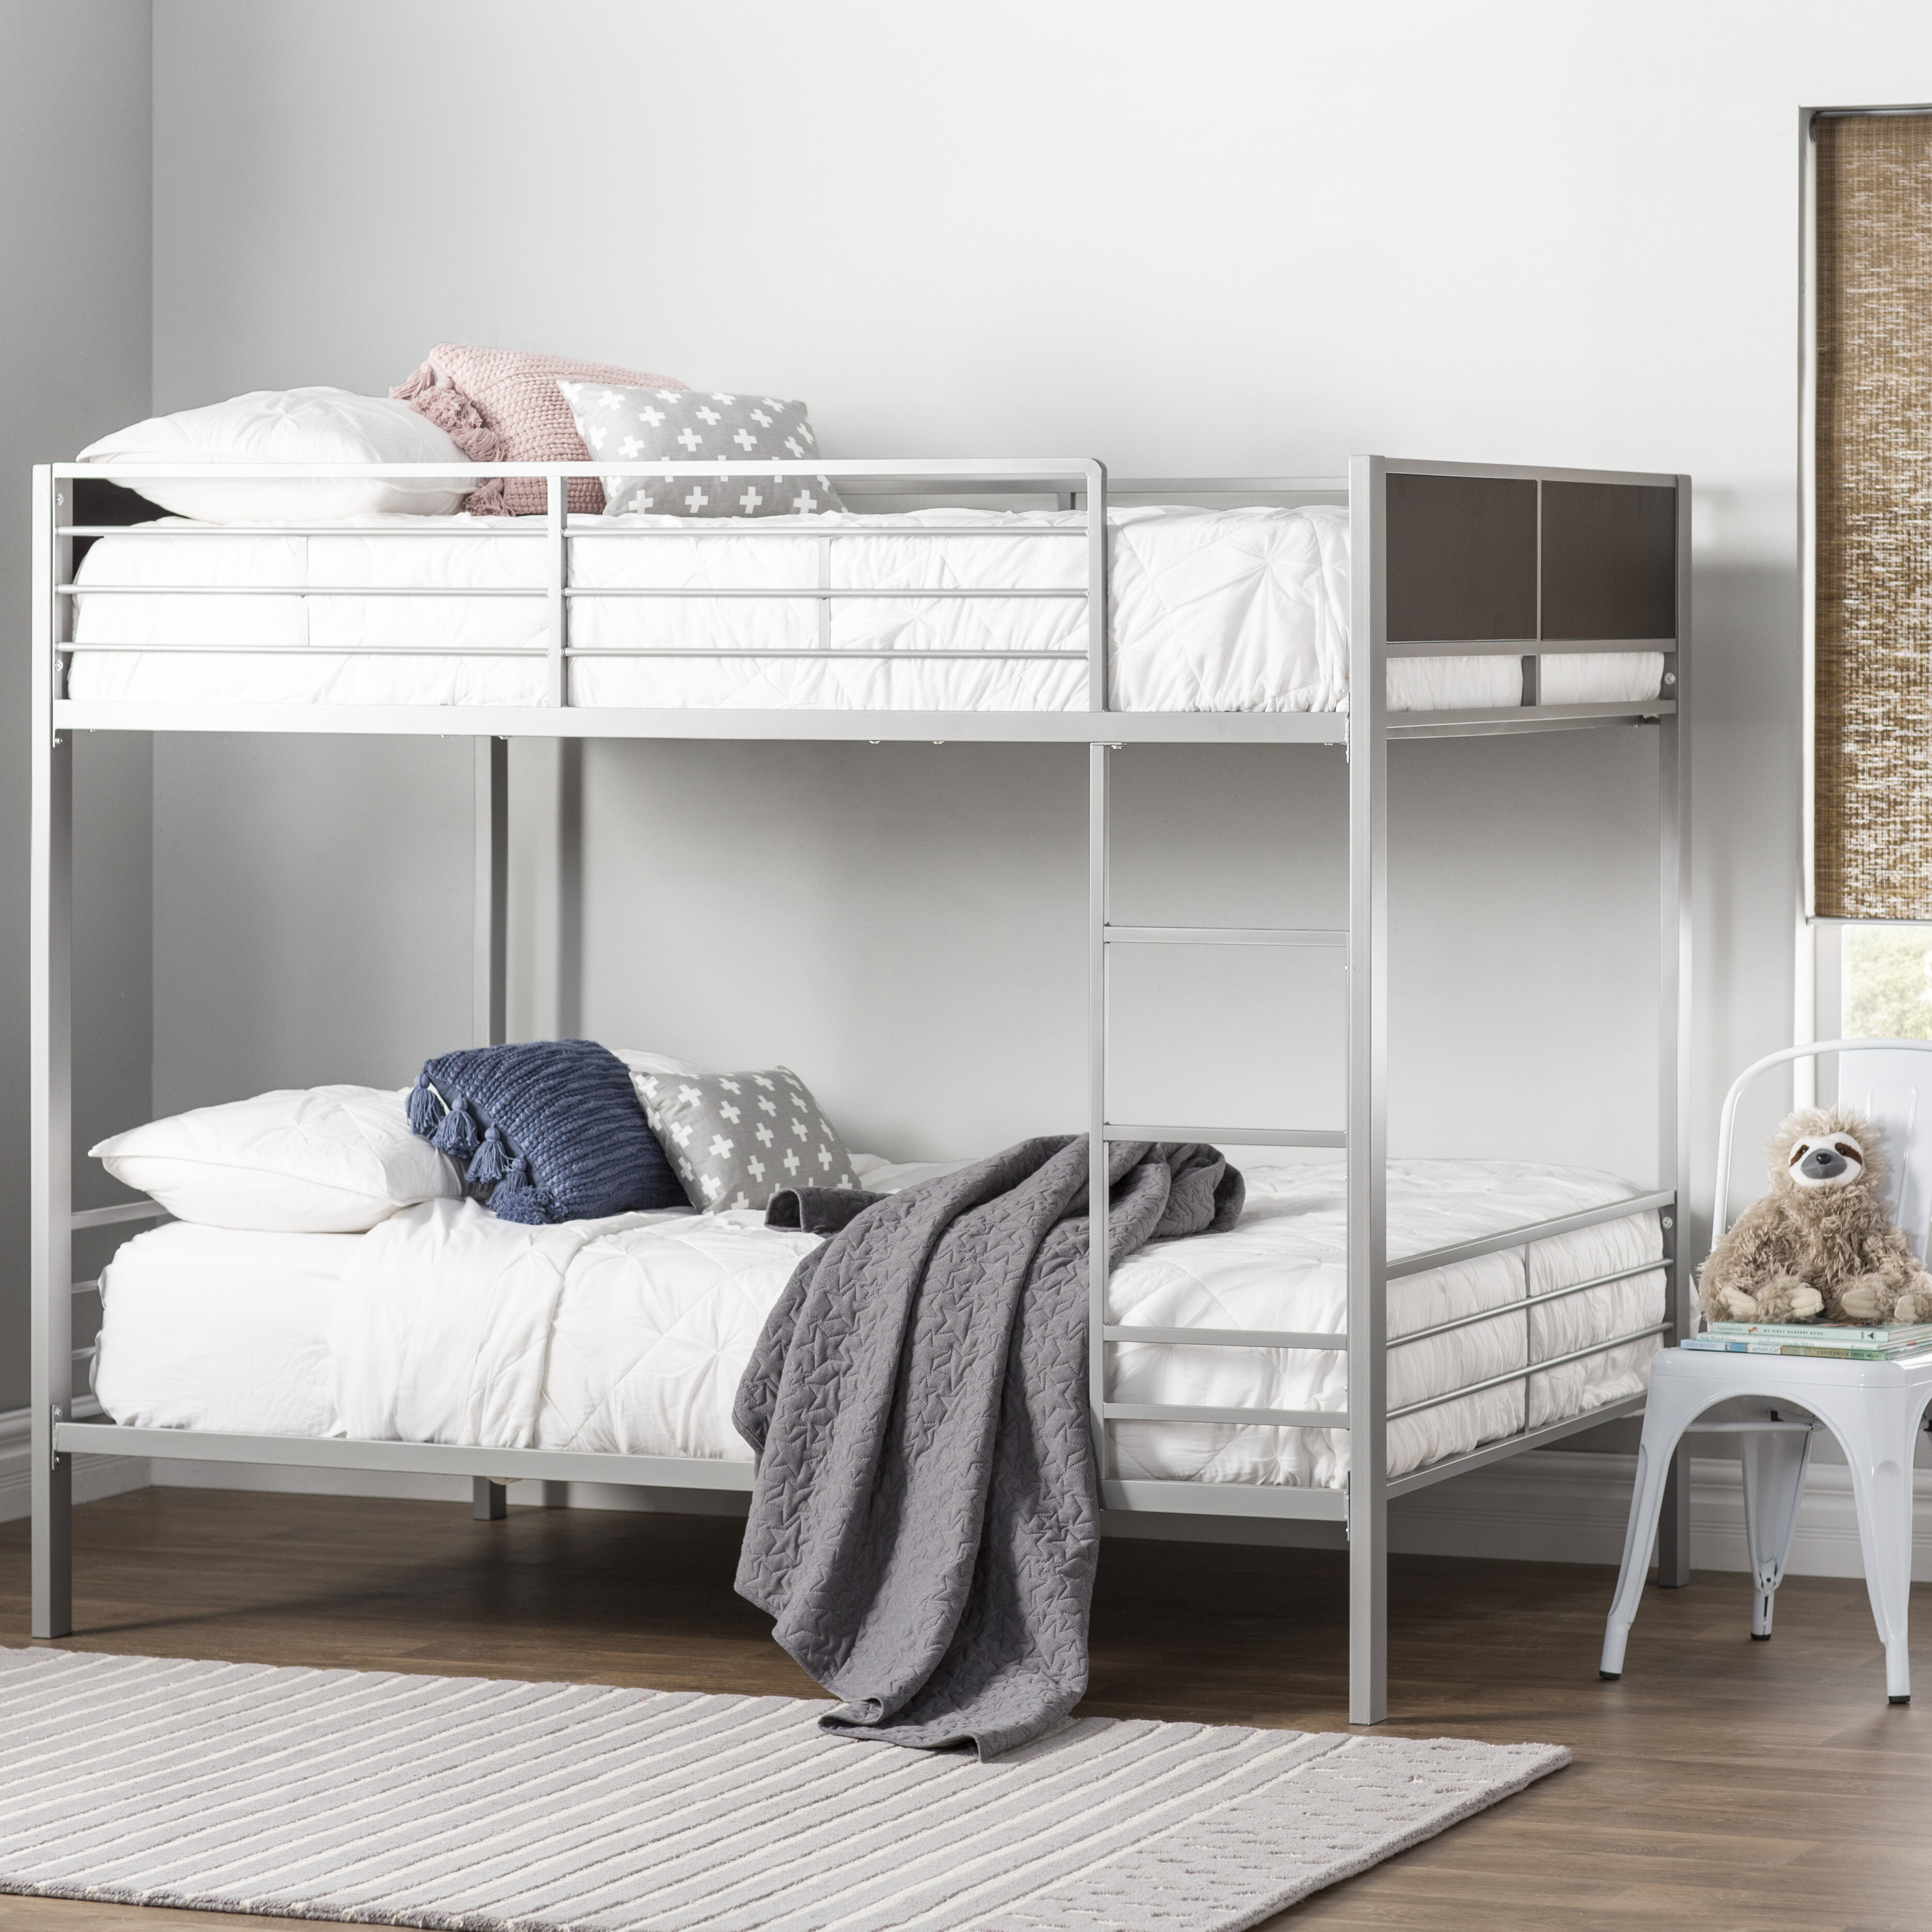 chic bunk beds